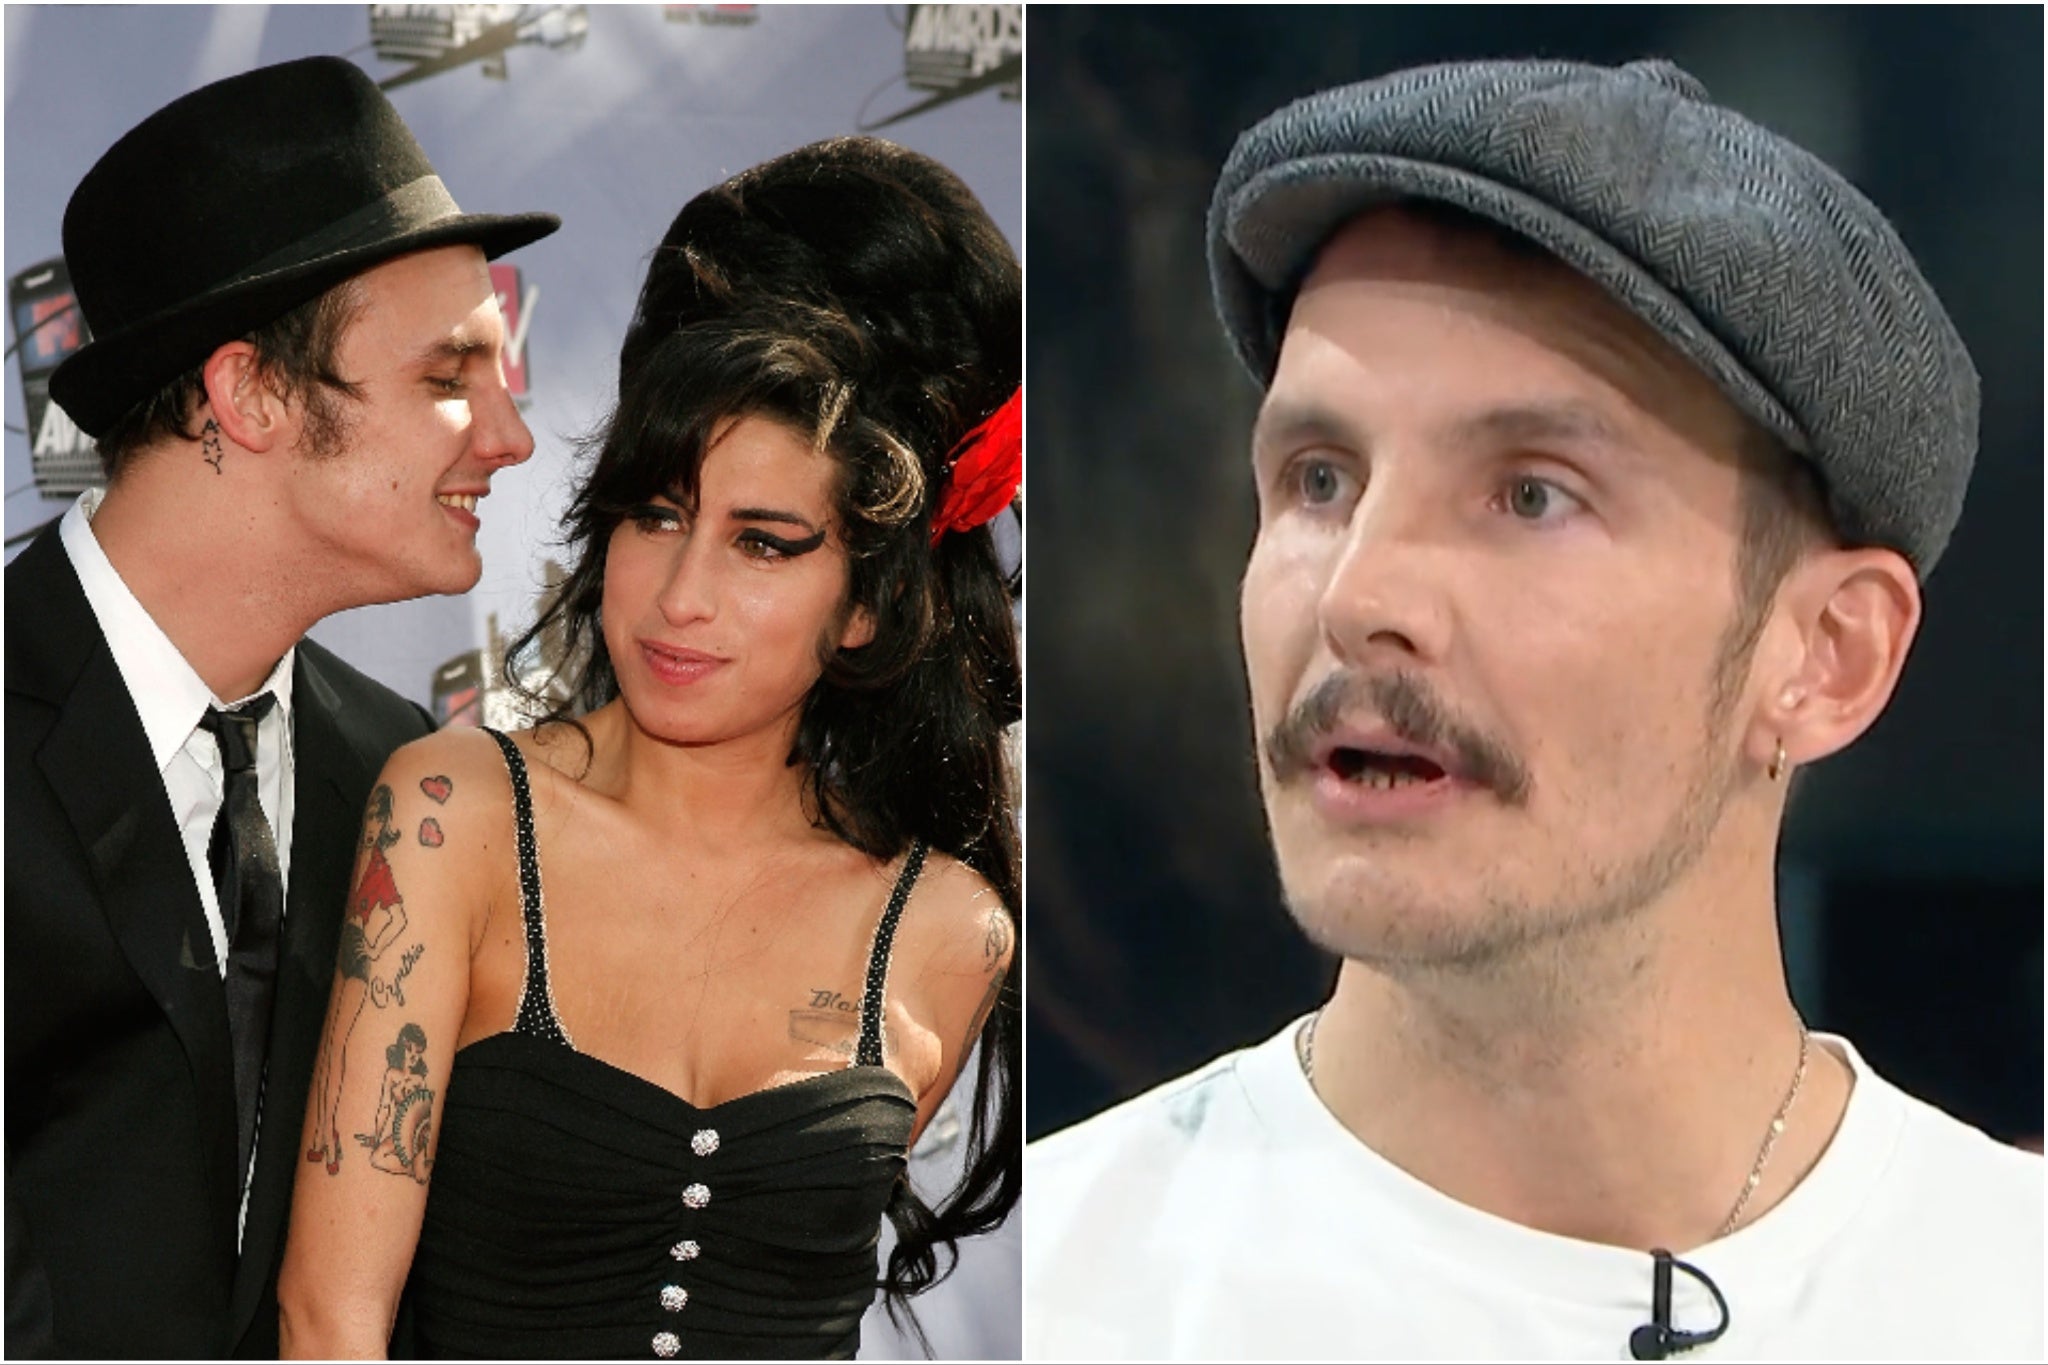 Blake Fielder-Civil has previously hit out at those who hold him ‘responsible’ for Winehouse’s death